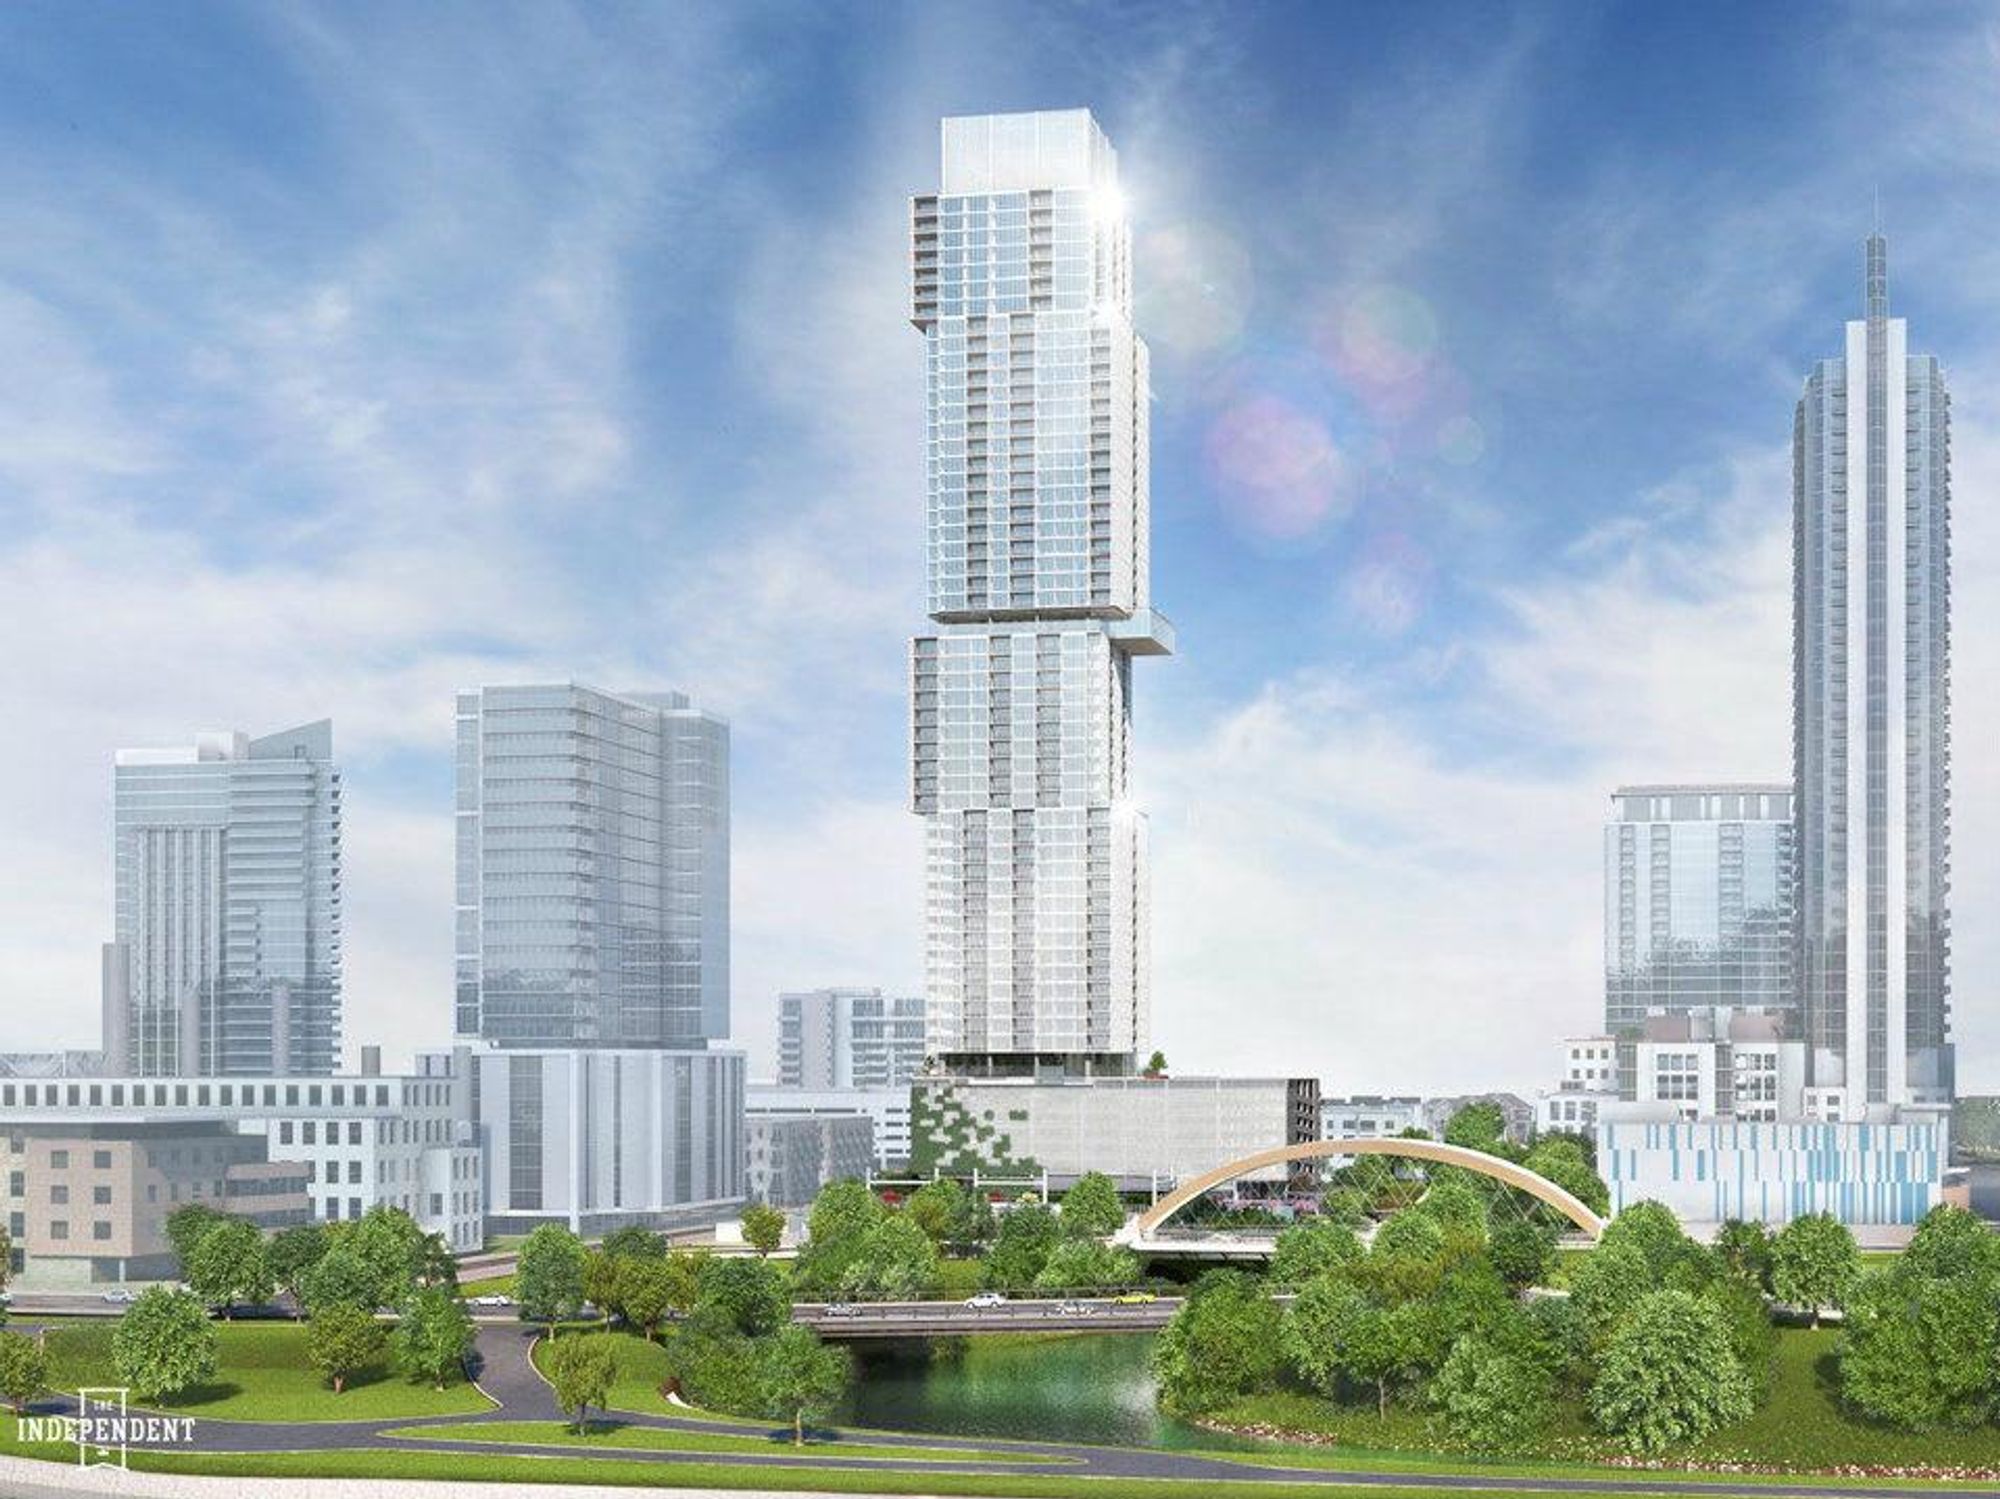 The Independent downtown Austin building skyscraper rendering